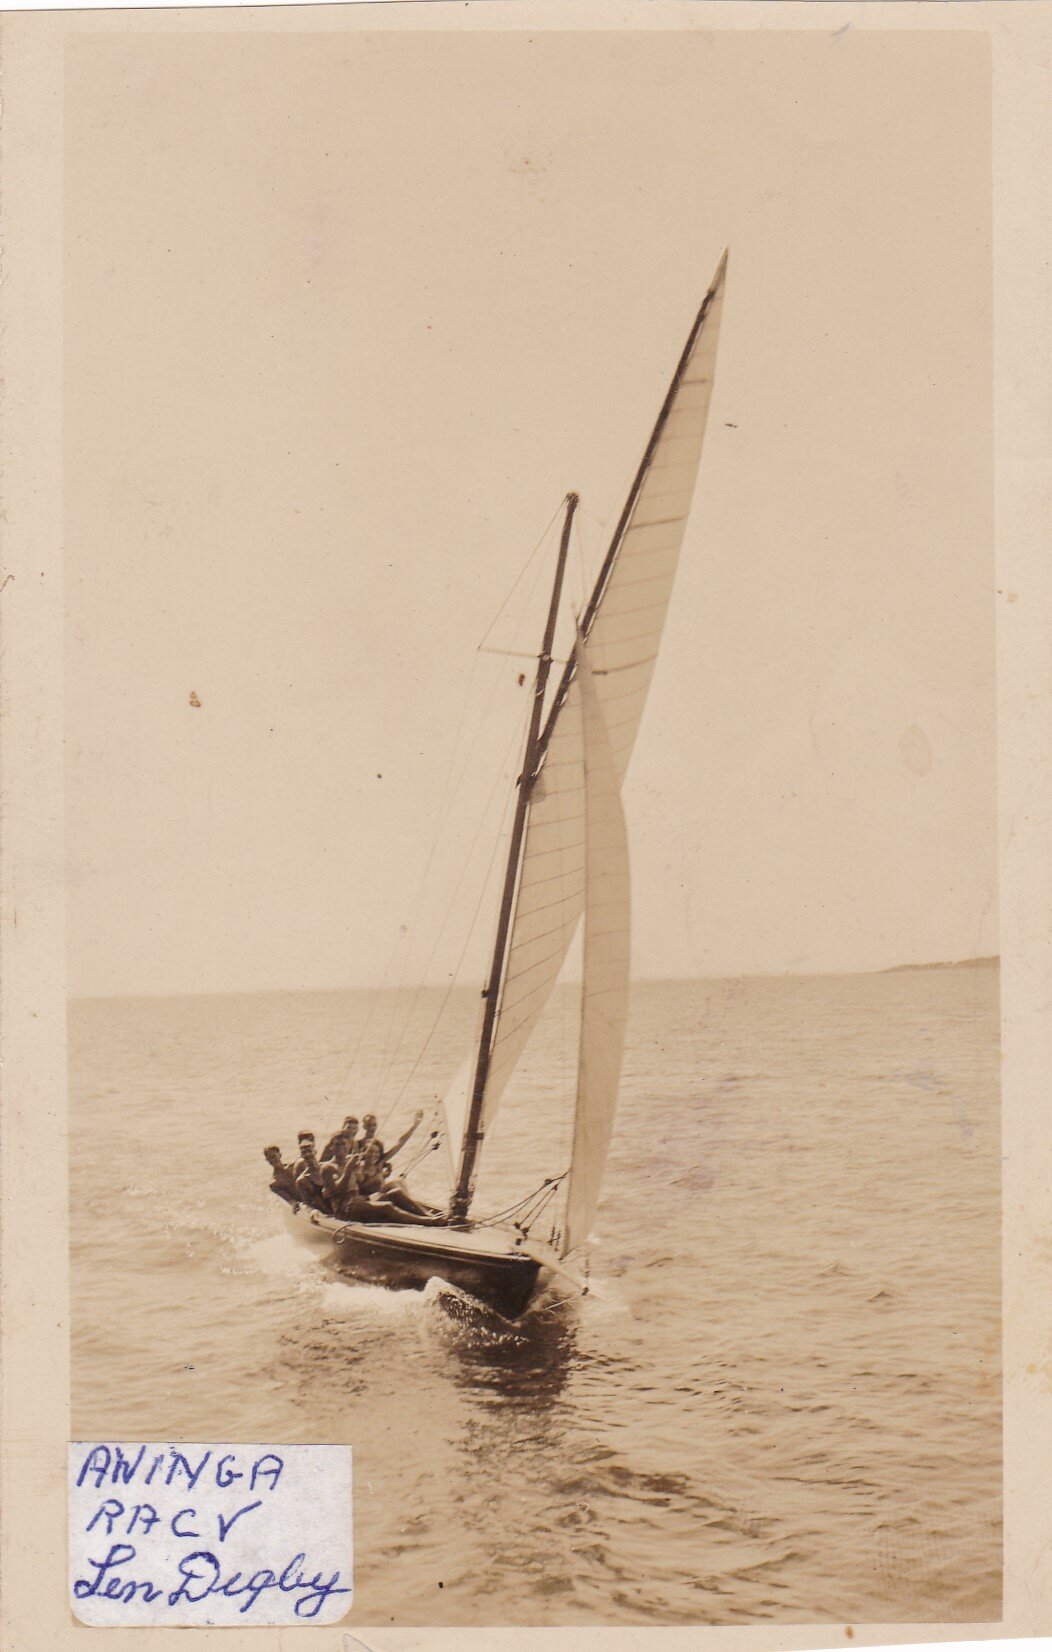 AWINGA skippered by Len Digby